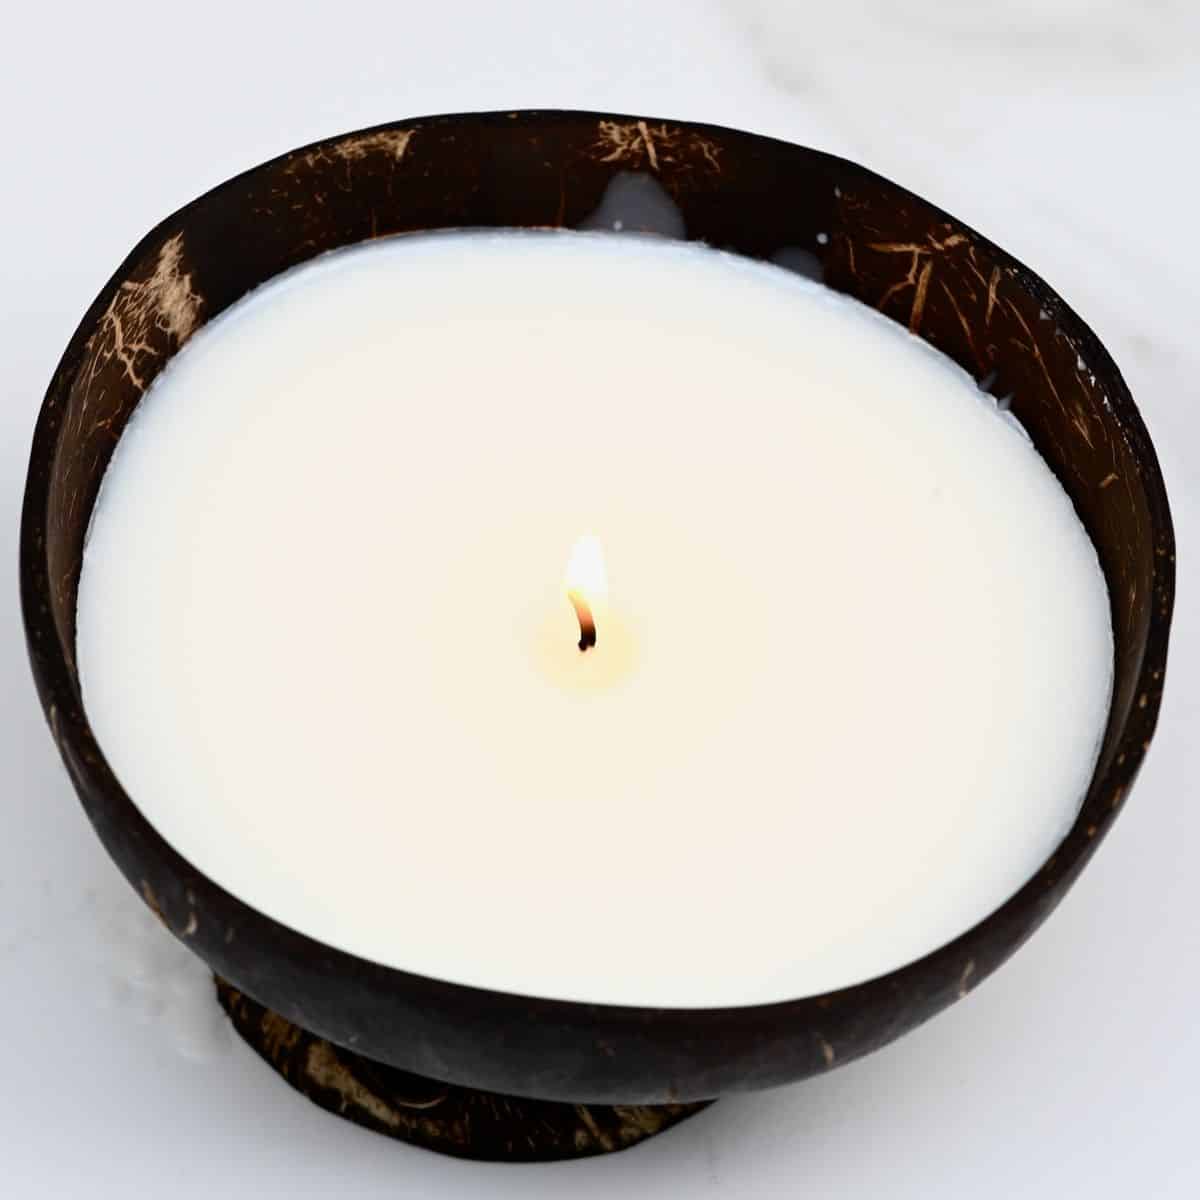 https://www.alphafoodie.com/wp-content/uploads/2021/11/How-to-make-a-candle.jpg